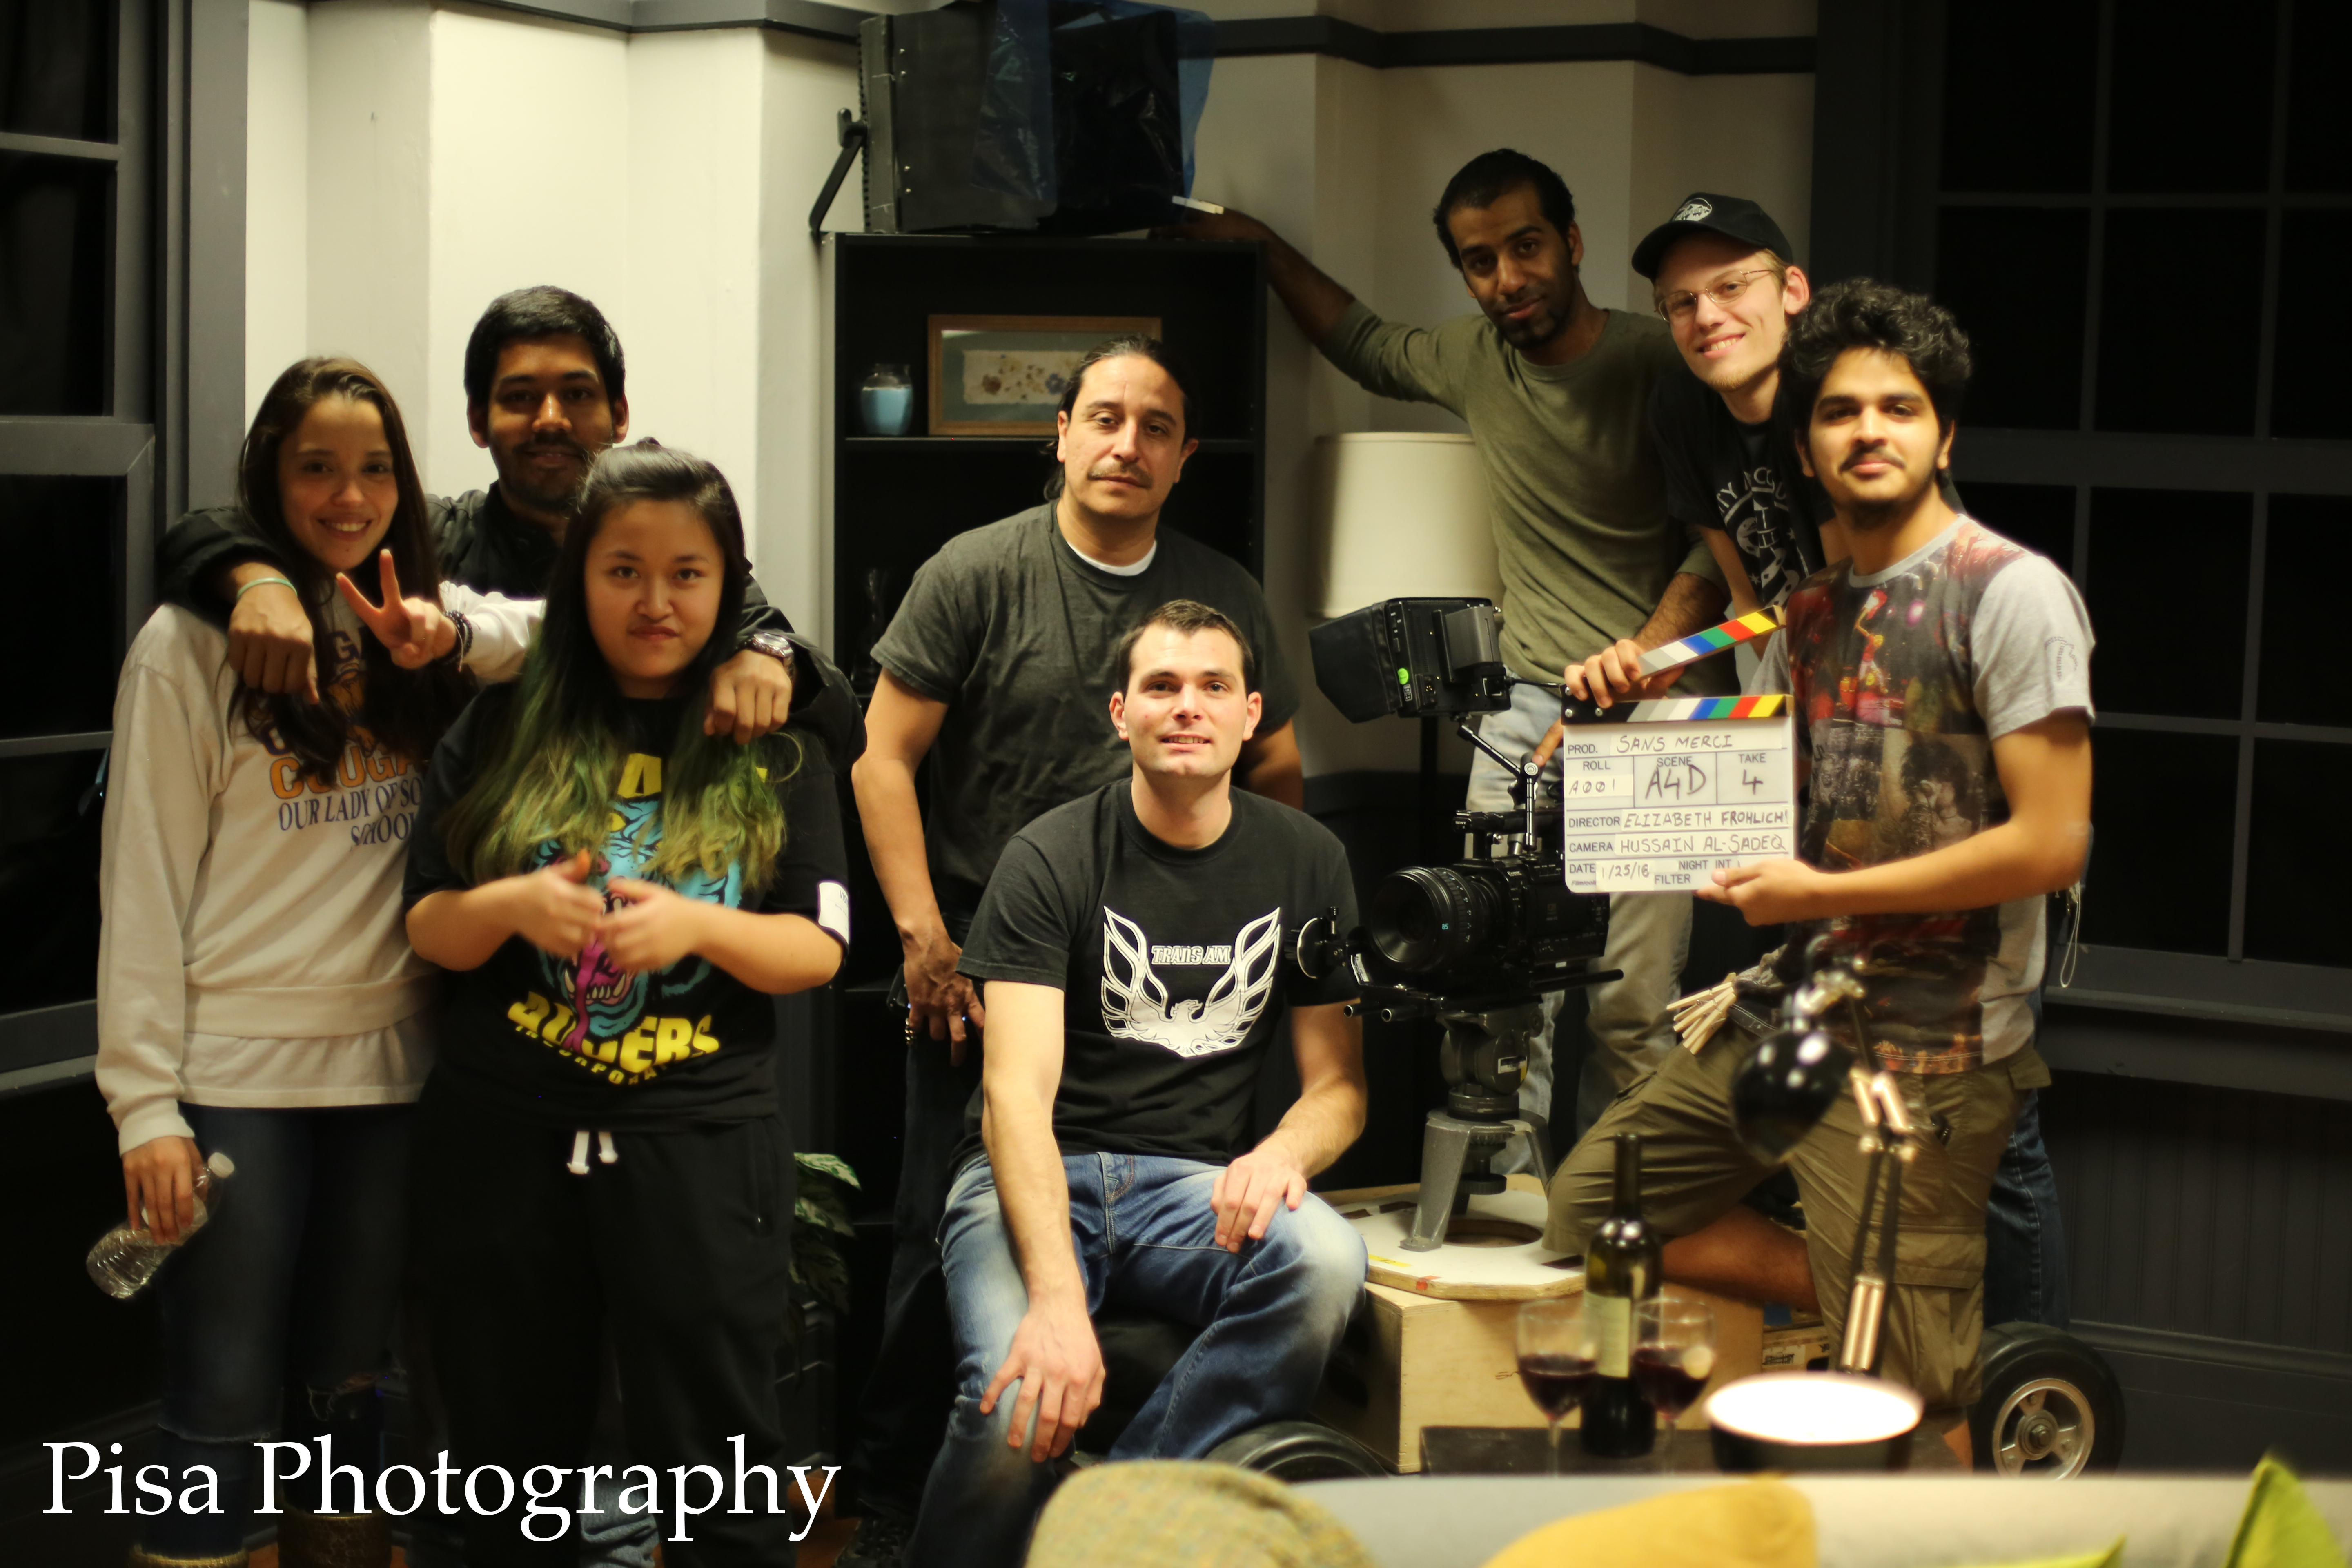 With the camera team for the Sans Merci. Hussain was the producer and Director of Photography.